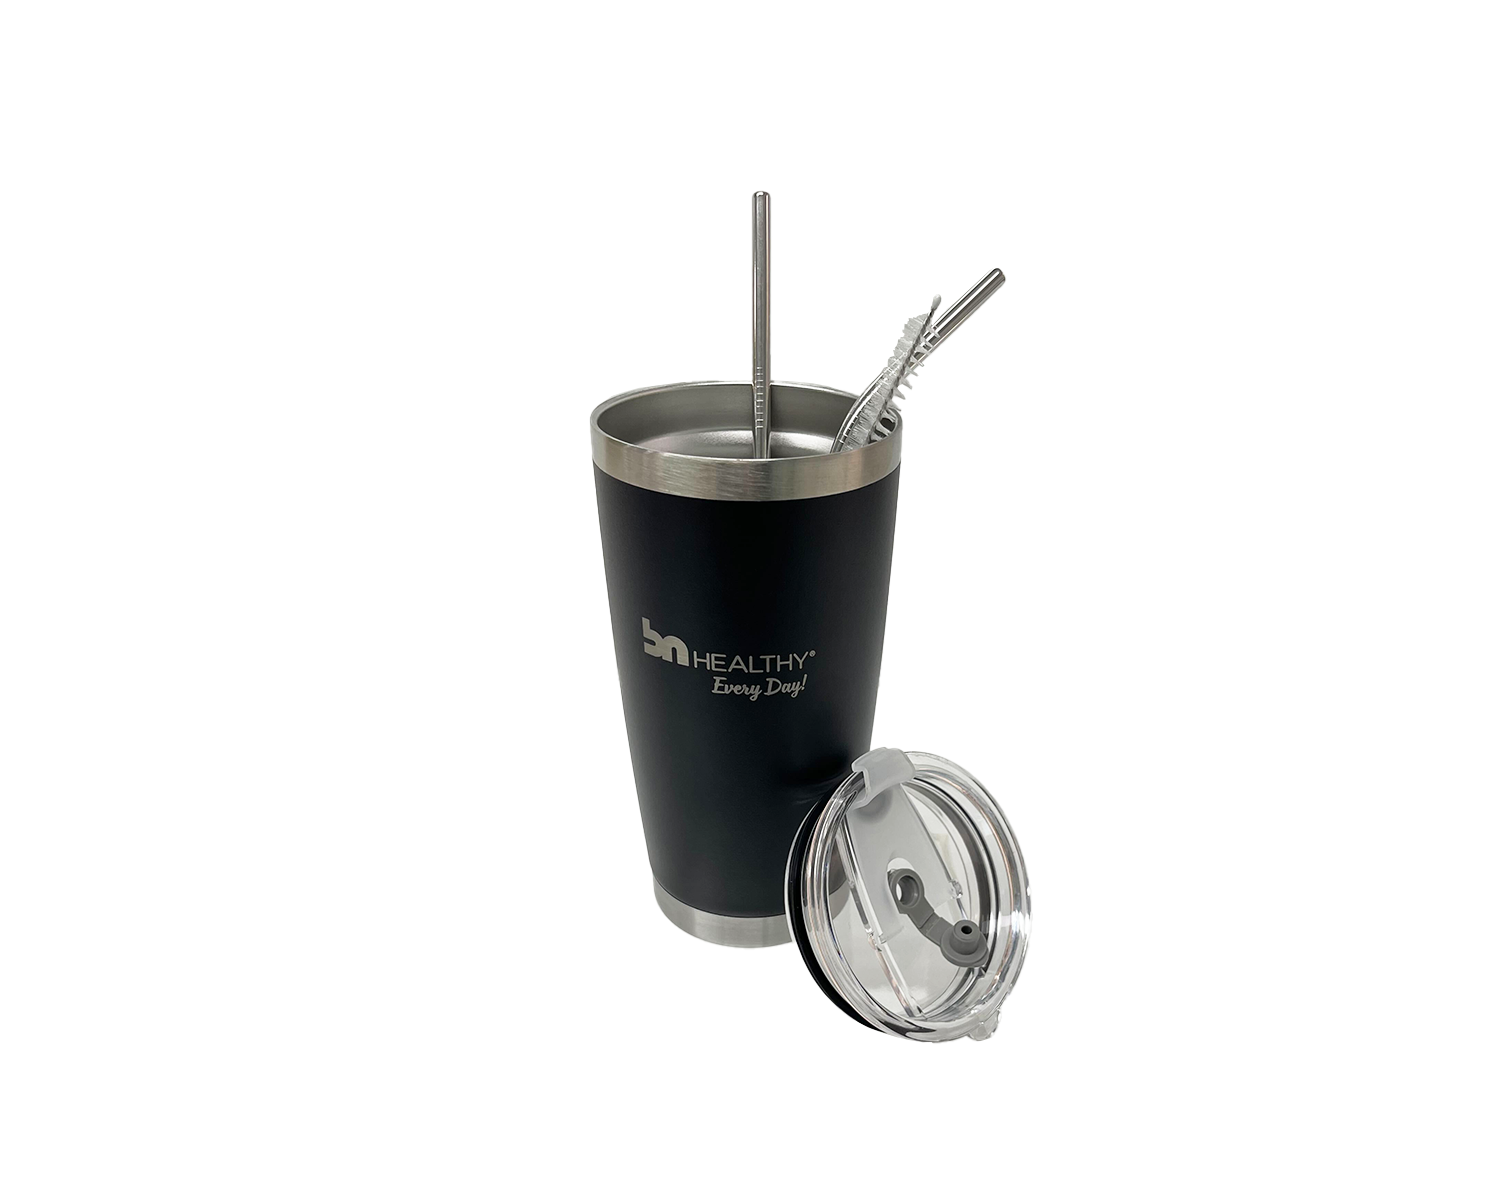 BN Travel Mug with Straws black colour with multiple straws